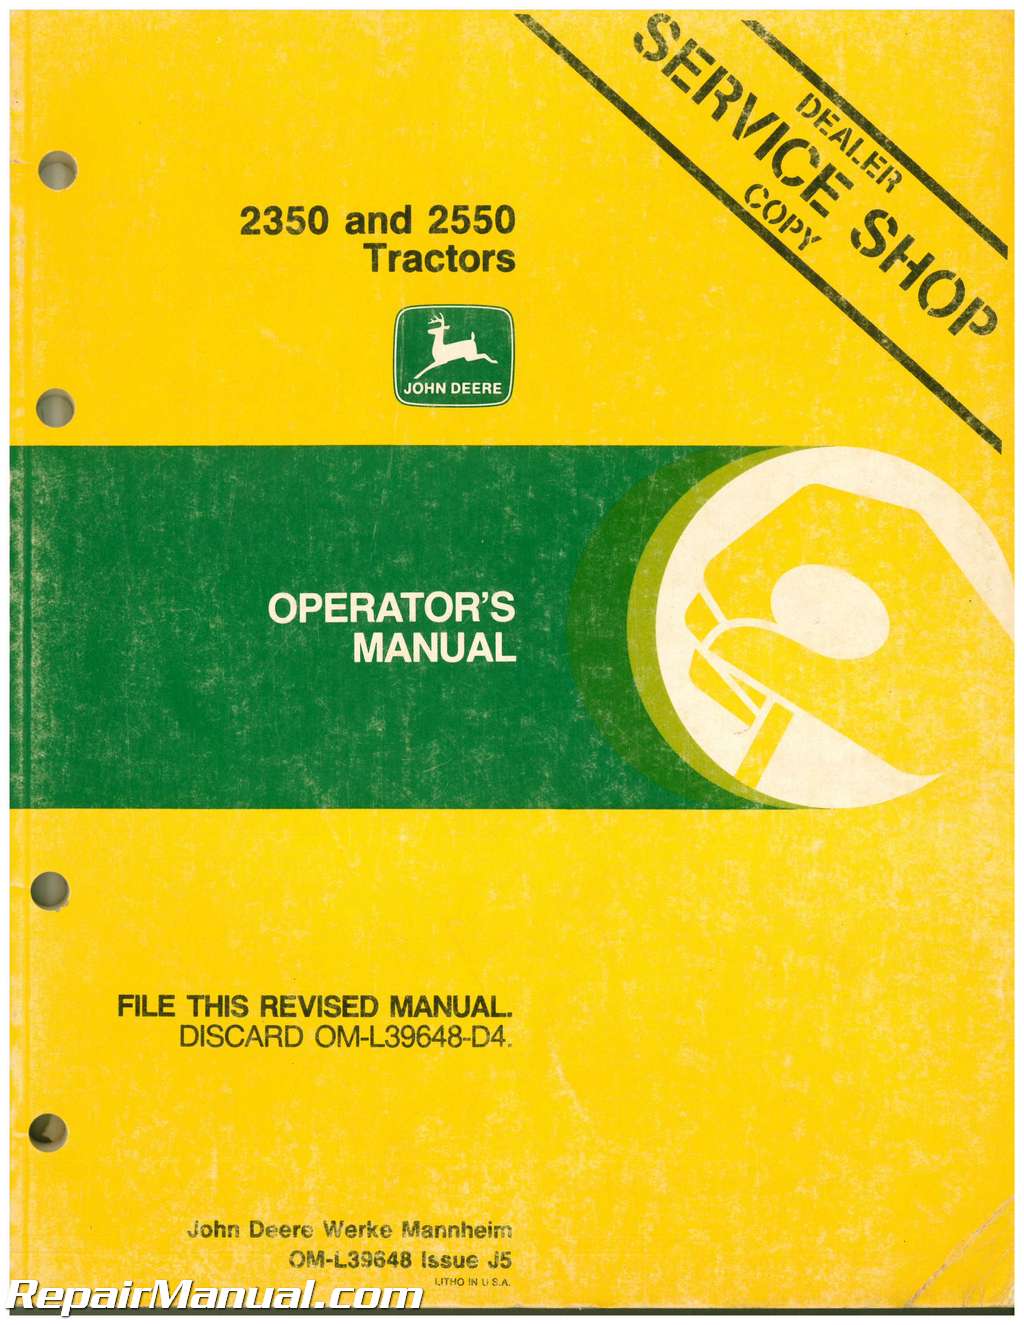 TECHNICAL SERVICE MANUAL FOR 2350 2550 JOHN DEERE TRACTOR 